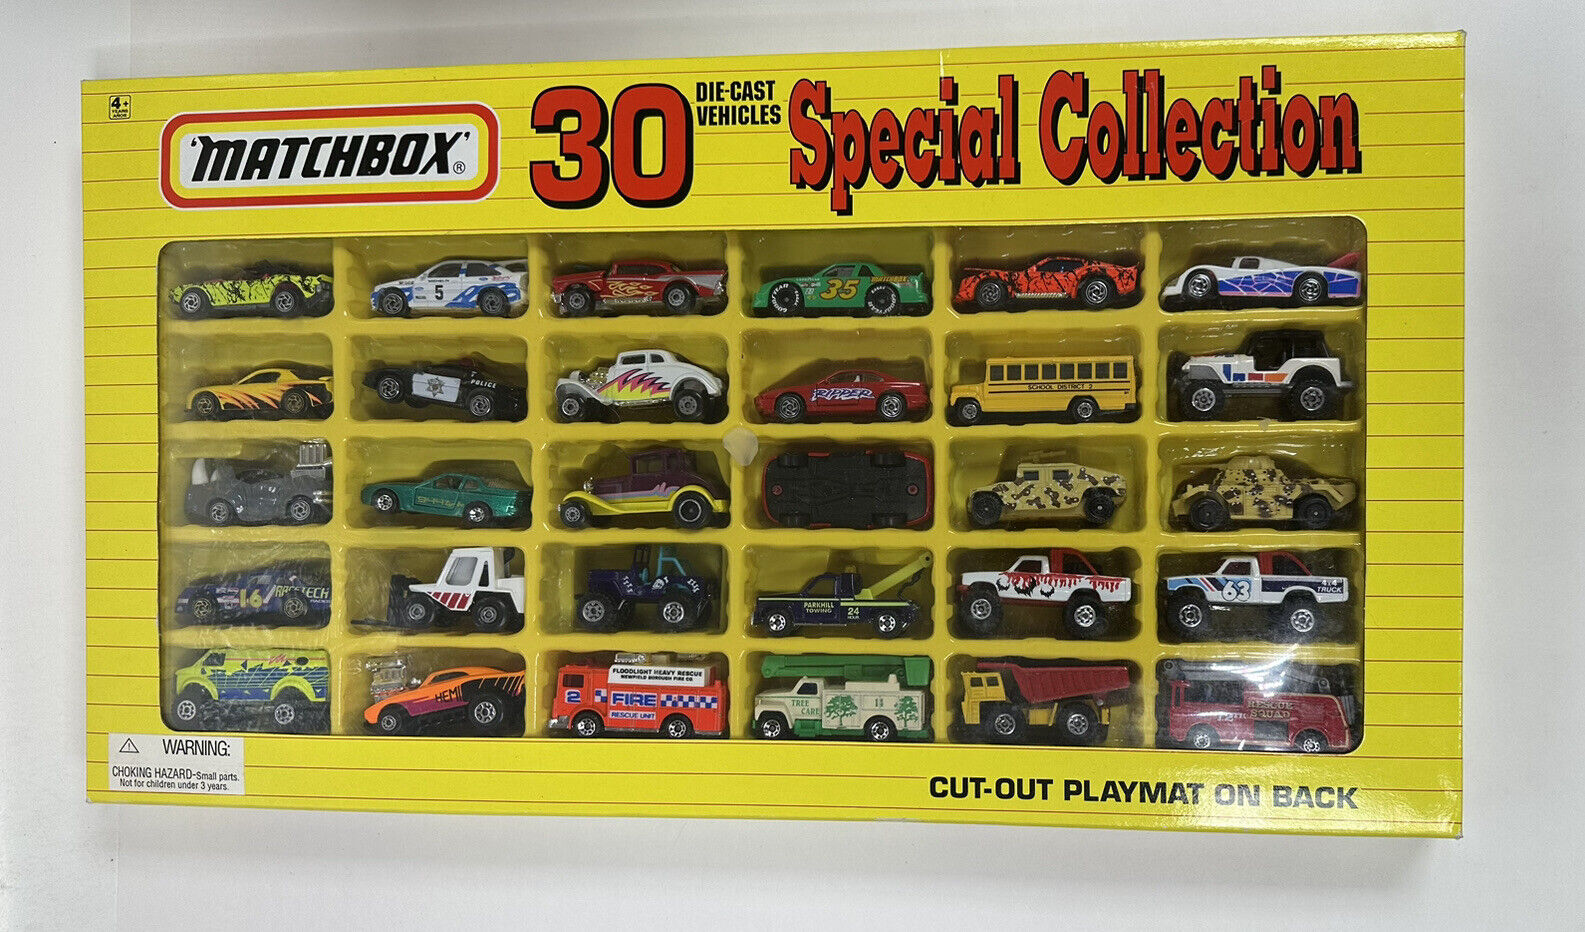 Vintage 1993 Matchbox 30 Vehicle Special Collection Pack Cut-Out Track On Back